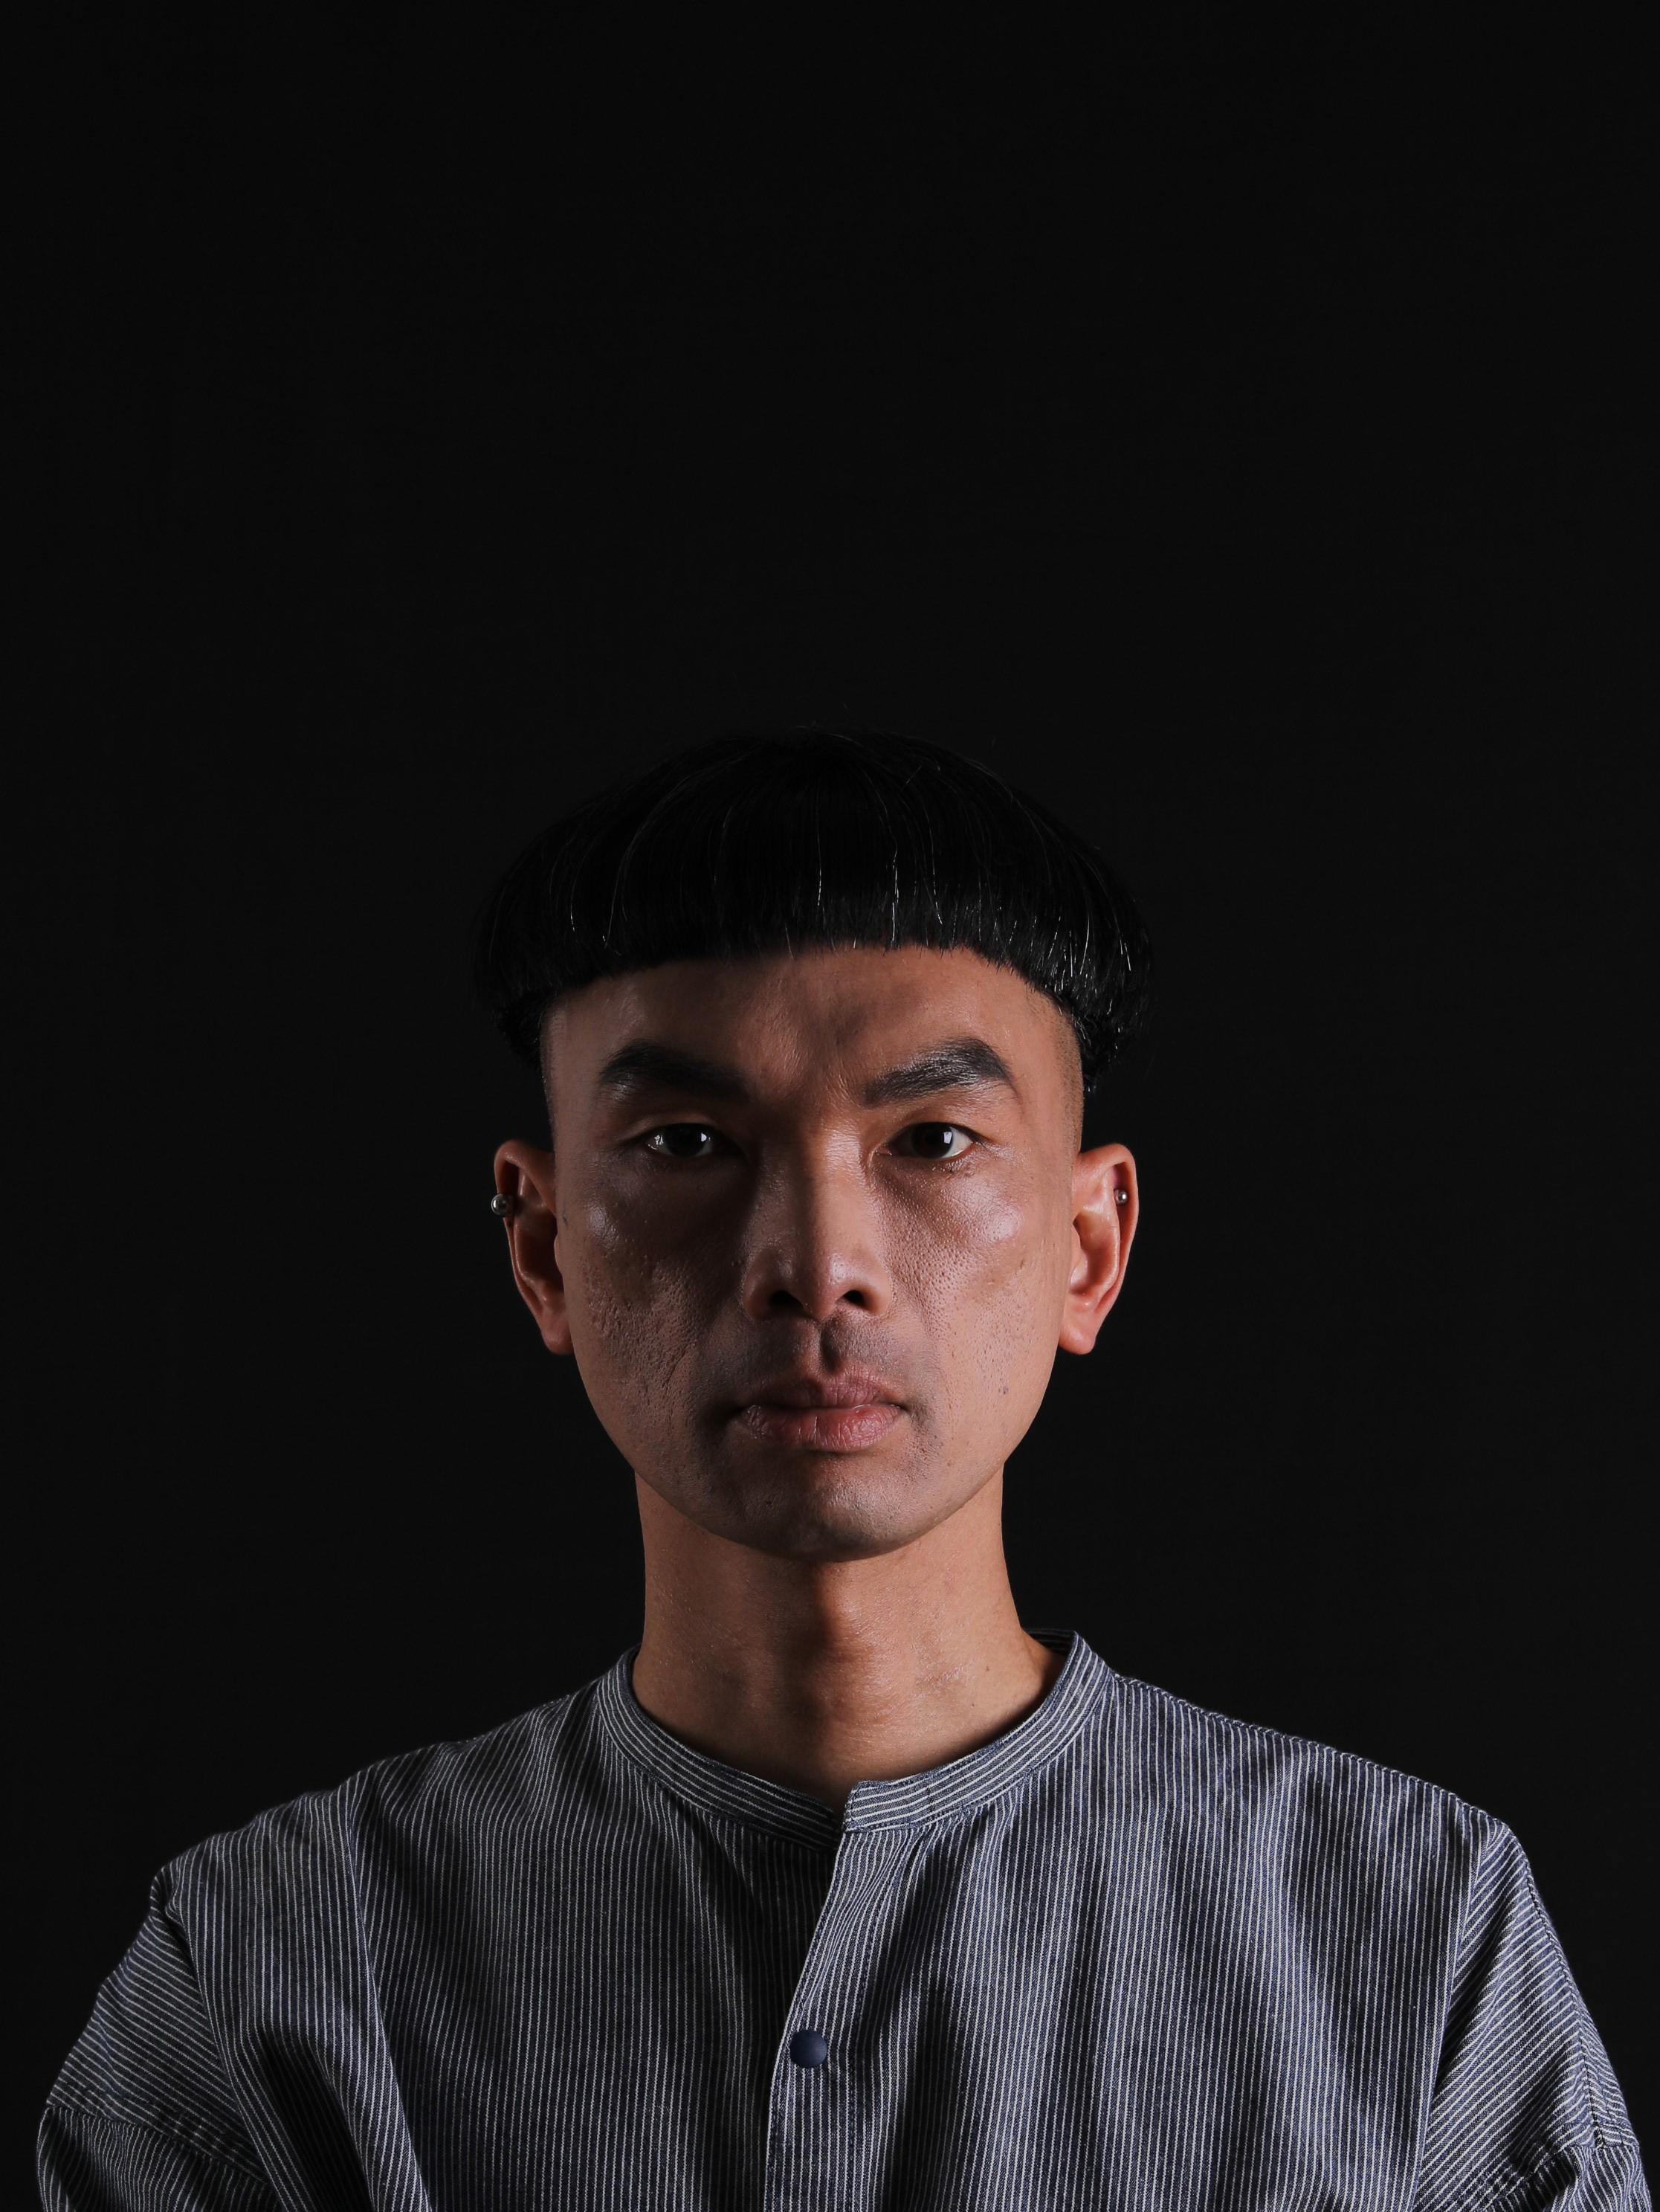 Multi-arts production, "HACK", created by media artist GayBird and theatre director Ata Wong, will be held from November 4 to 6 at the Studio Theatre of the Hong Kong Cultural Centre. Photo shows GayBird, who excels at using technology, media art, spacing and sound in his creations.